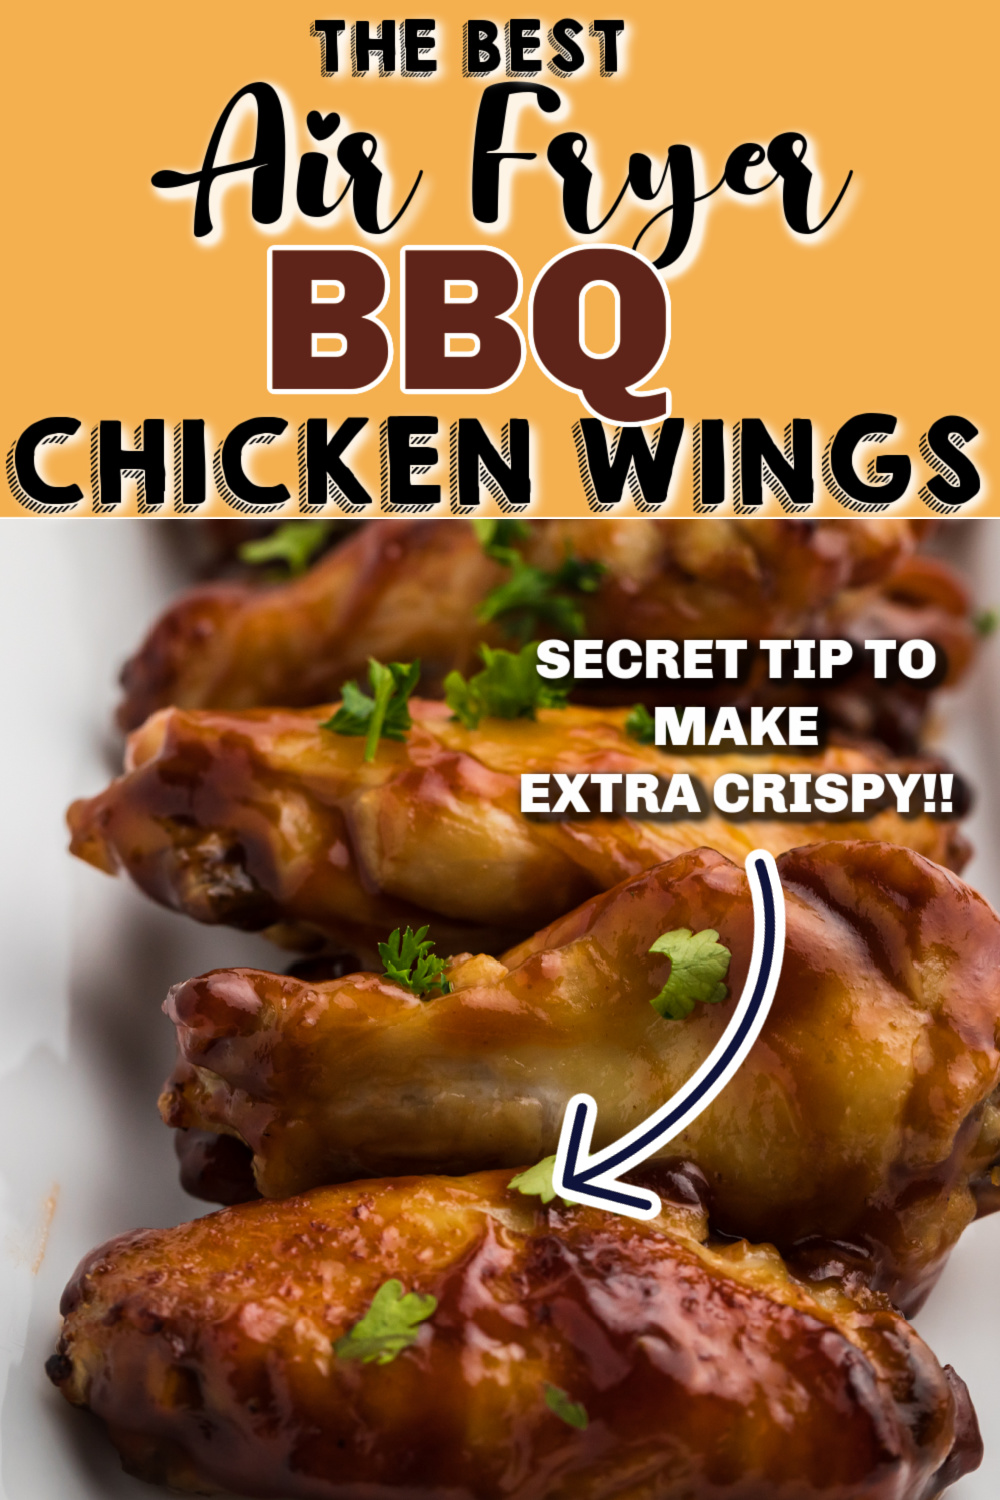 These Air Fryer BBQ Chicken Wings are about to rock your world! Made with your favorite bbq sauce, chicken wings, a little seasoning, and you'll have perfect crispy chicken wings in under 30 minutes. This easy Air Fryer recipe is great for family dinners or game days!